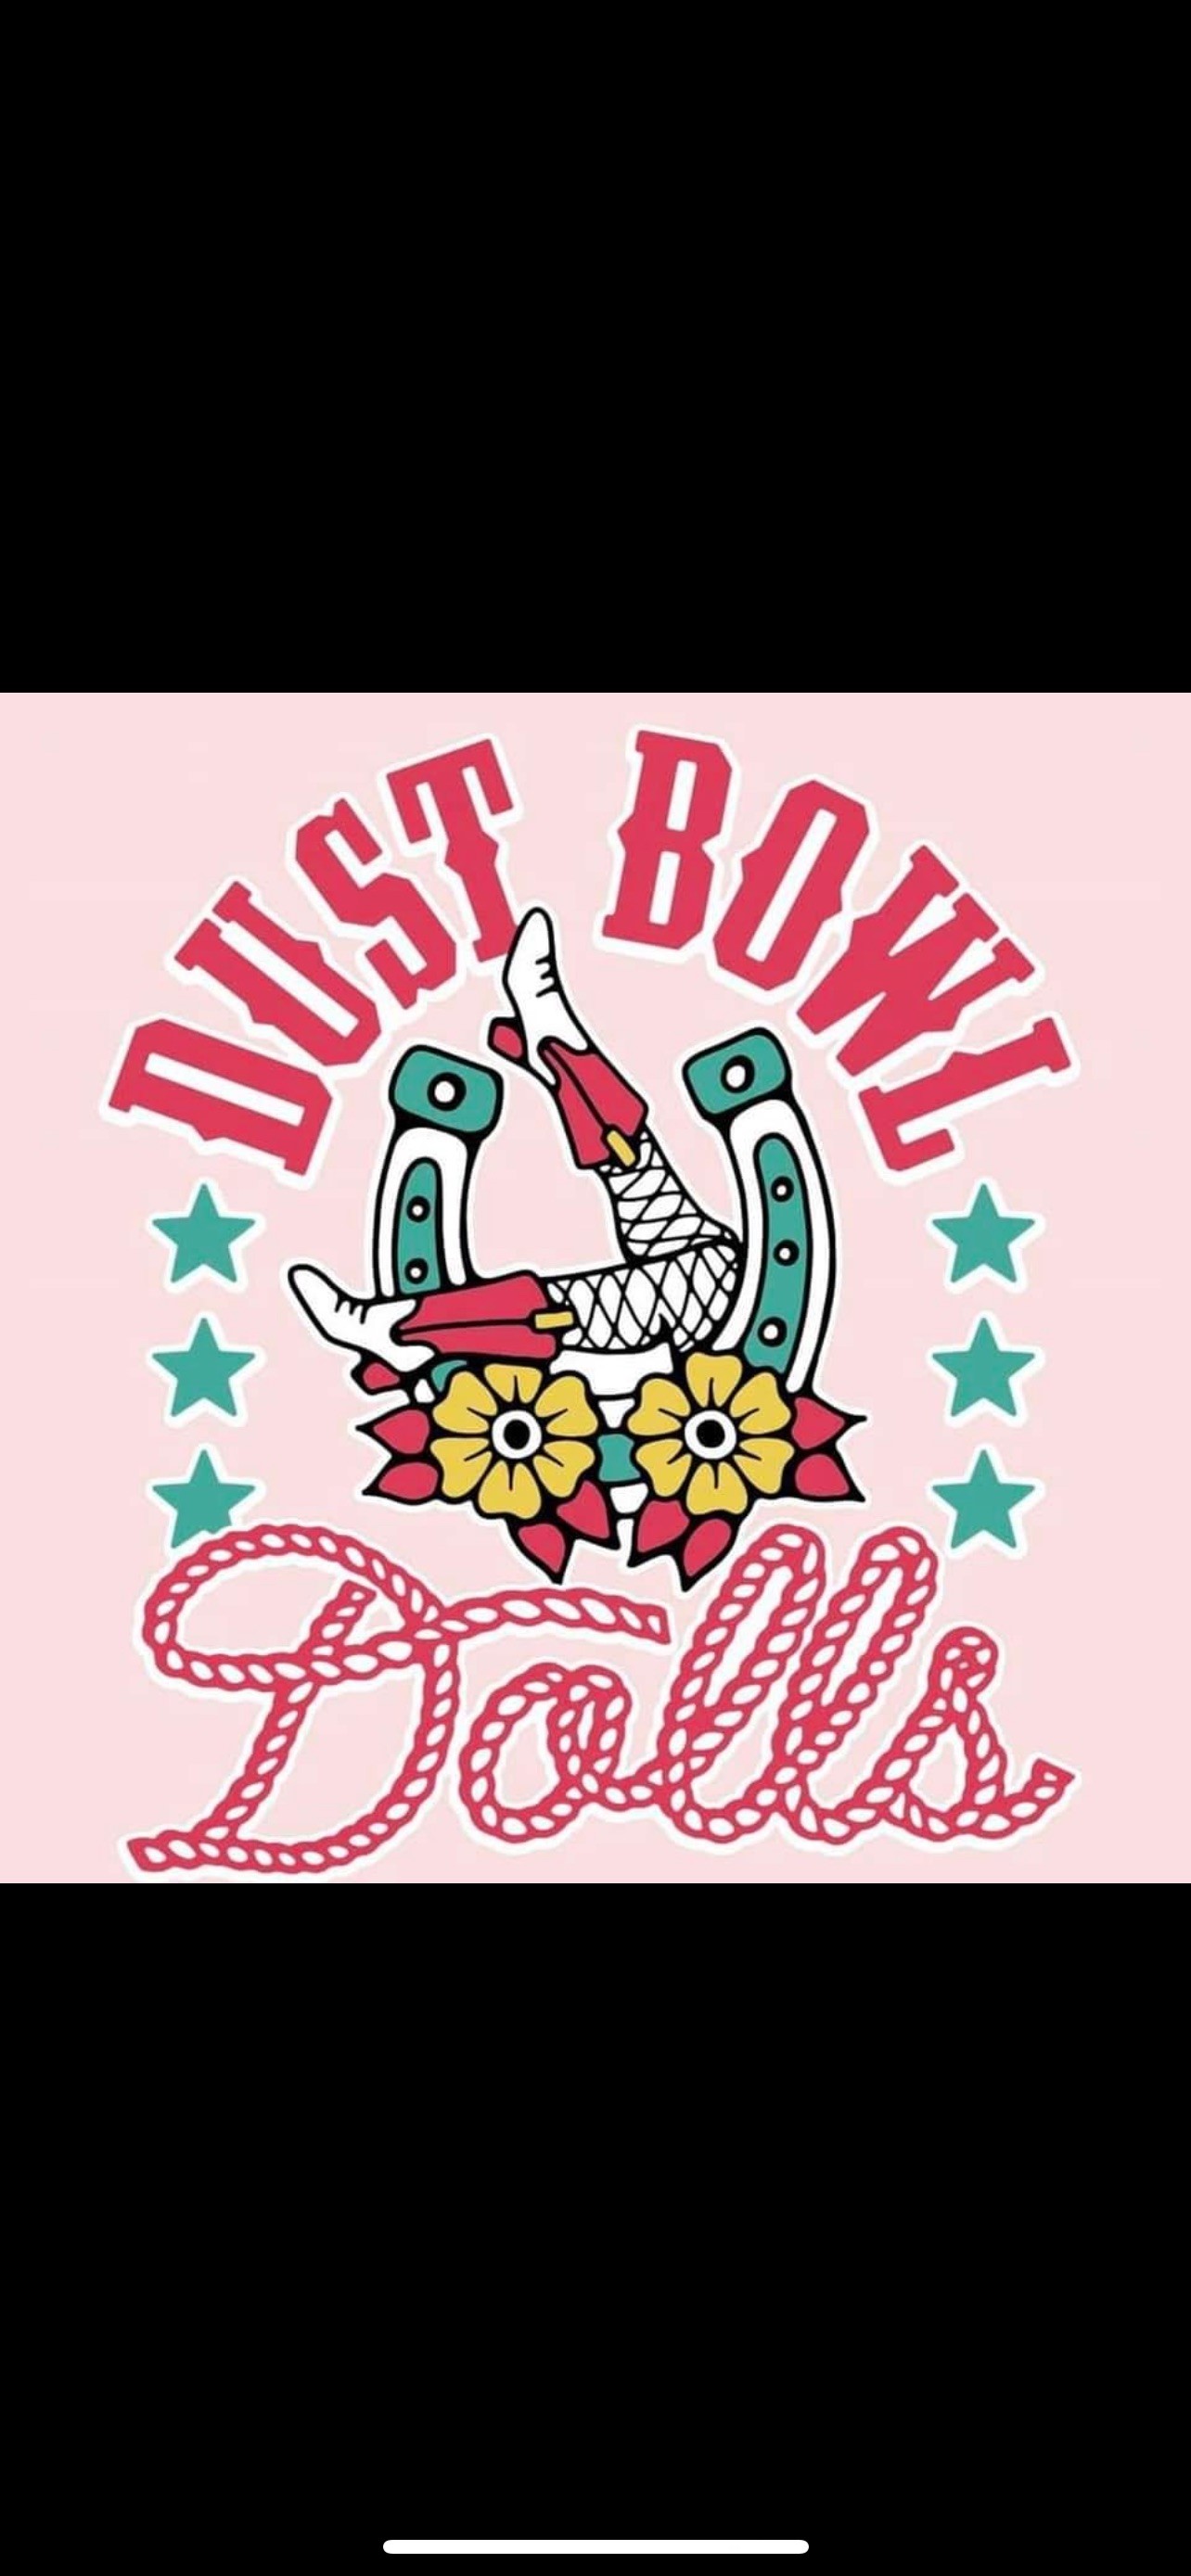 Dust Bowl Dolls Burlesque Show Live at RED  on Jun 22, 21:00@Boondocks Tavern - Buy tickets and Get information on Boondocks Tavern 